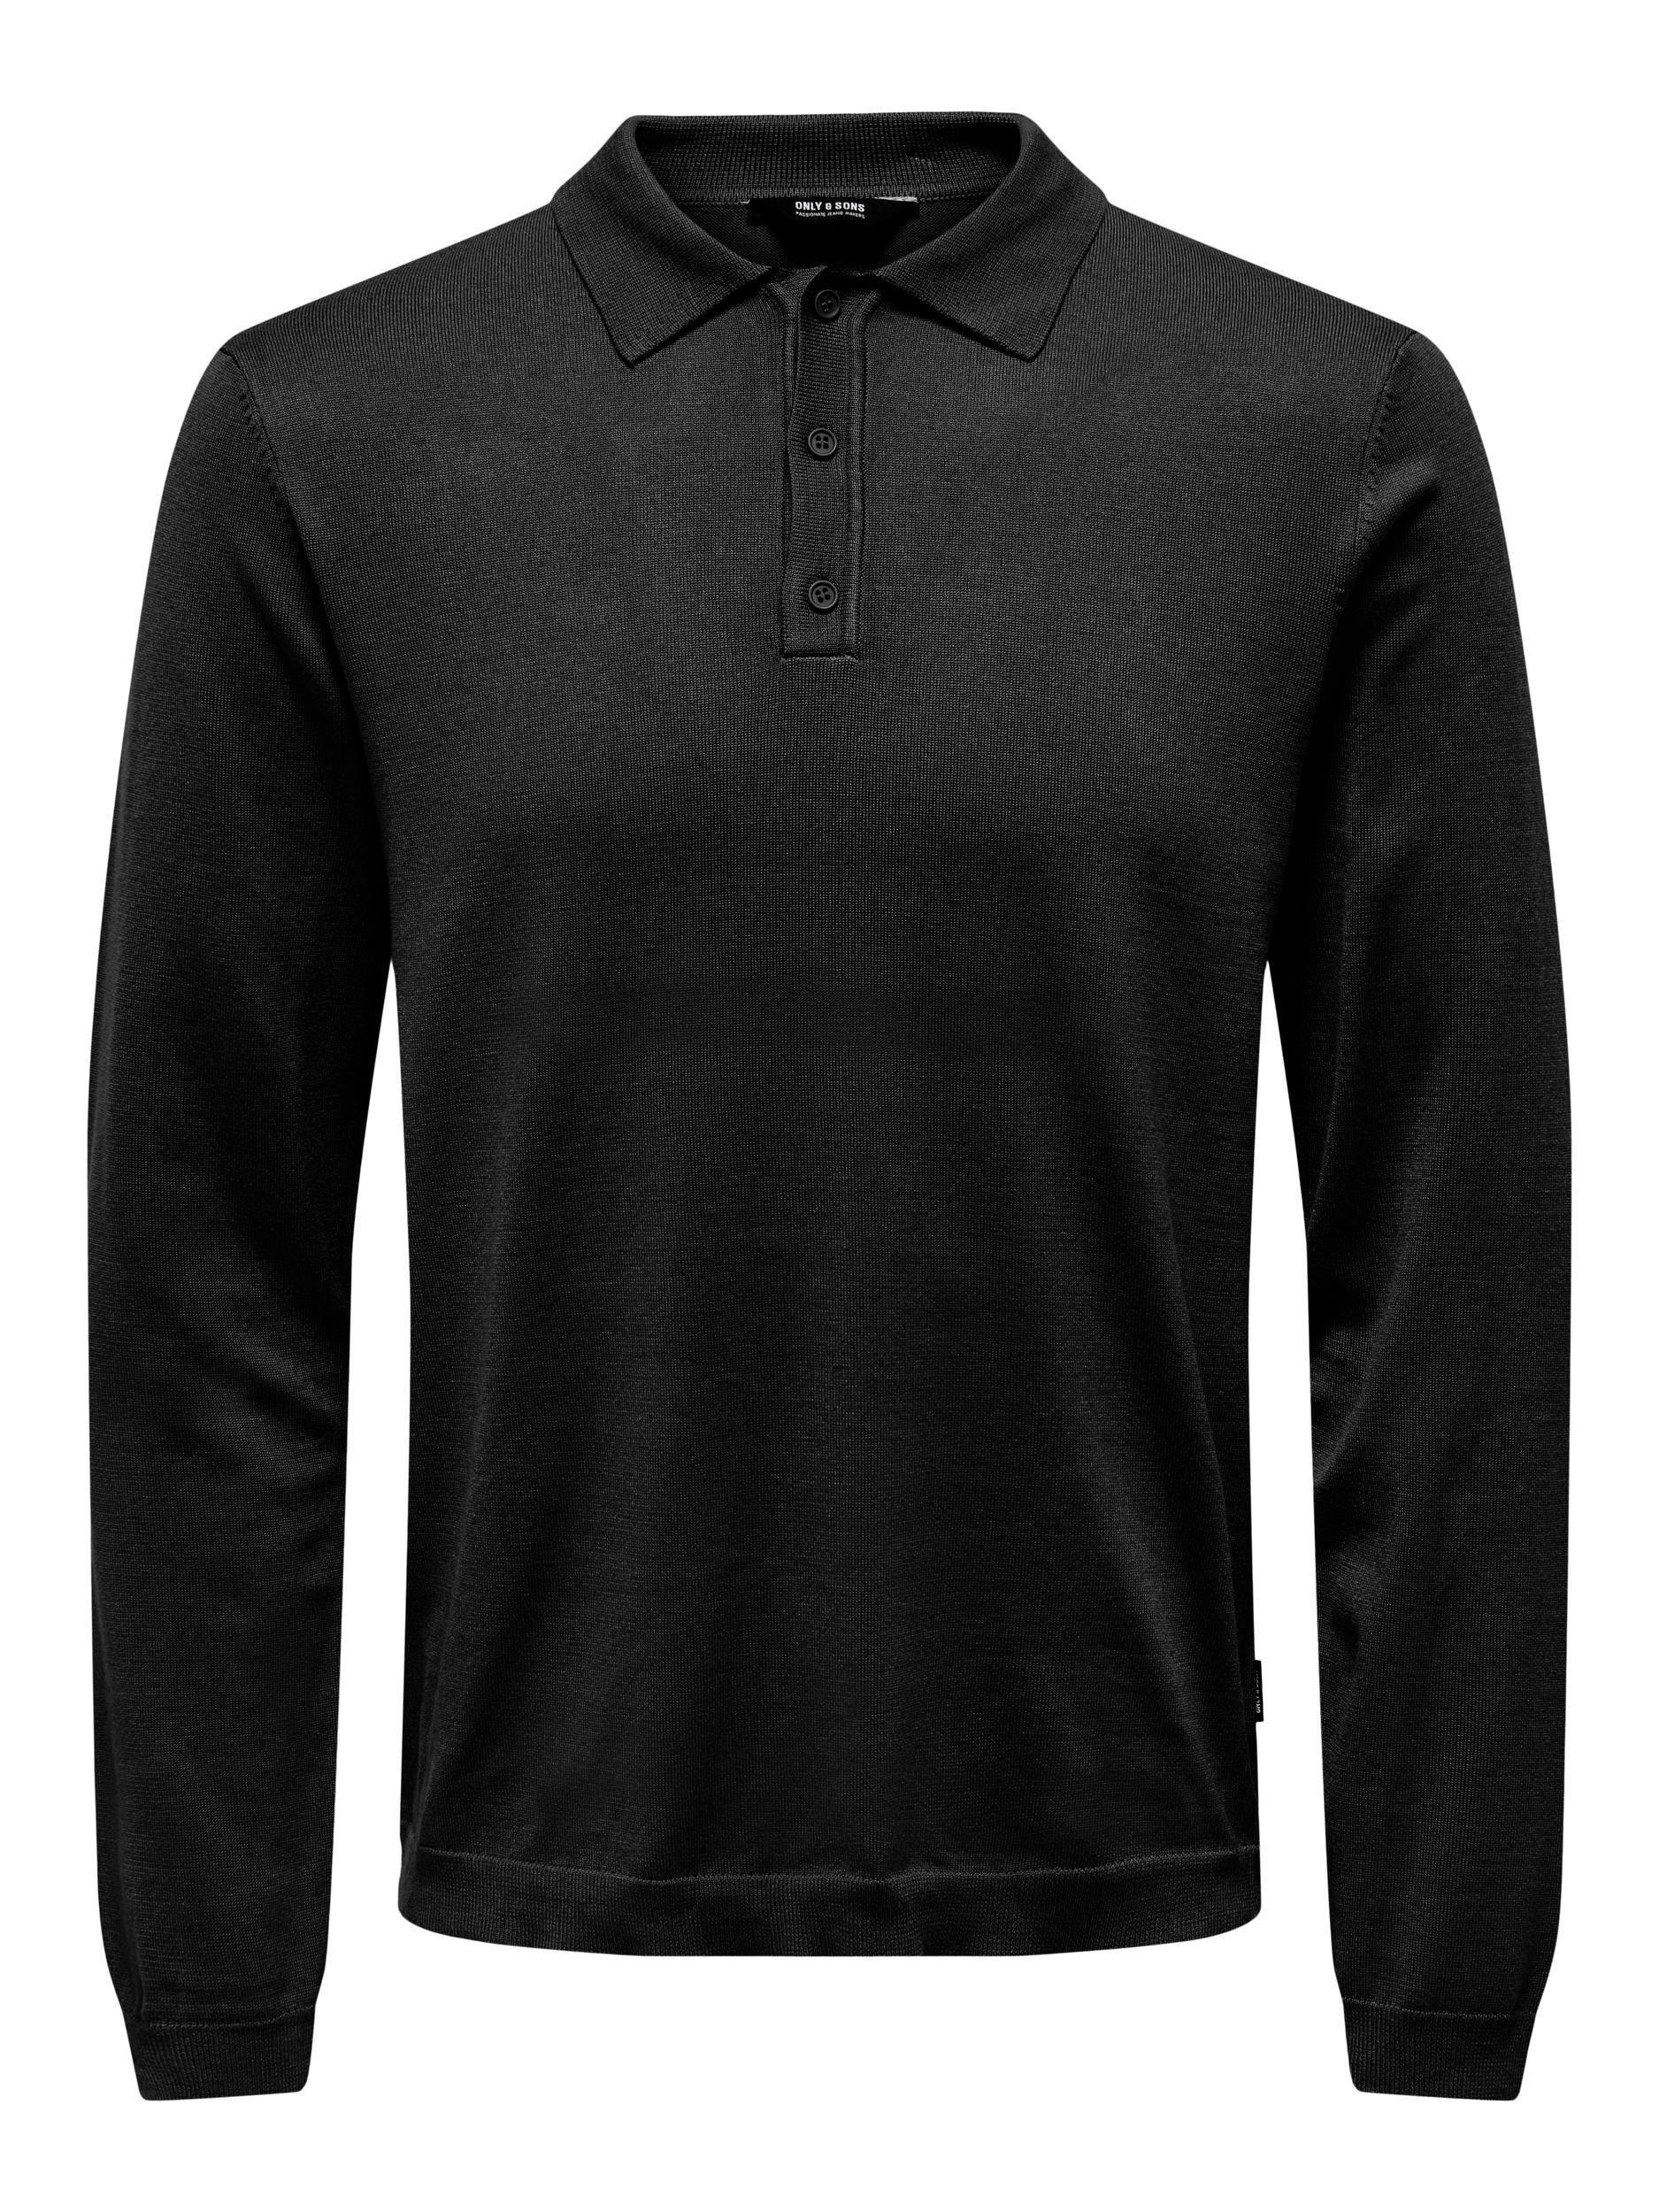 ONLY & SONS Polokragenpullover POLO NOOS REG ONSWYLER Black LS LIFE 14 KNIT